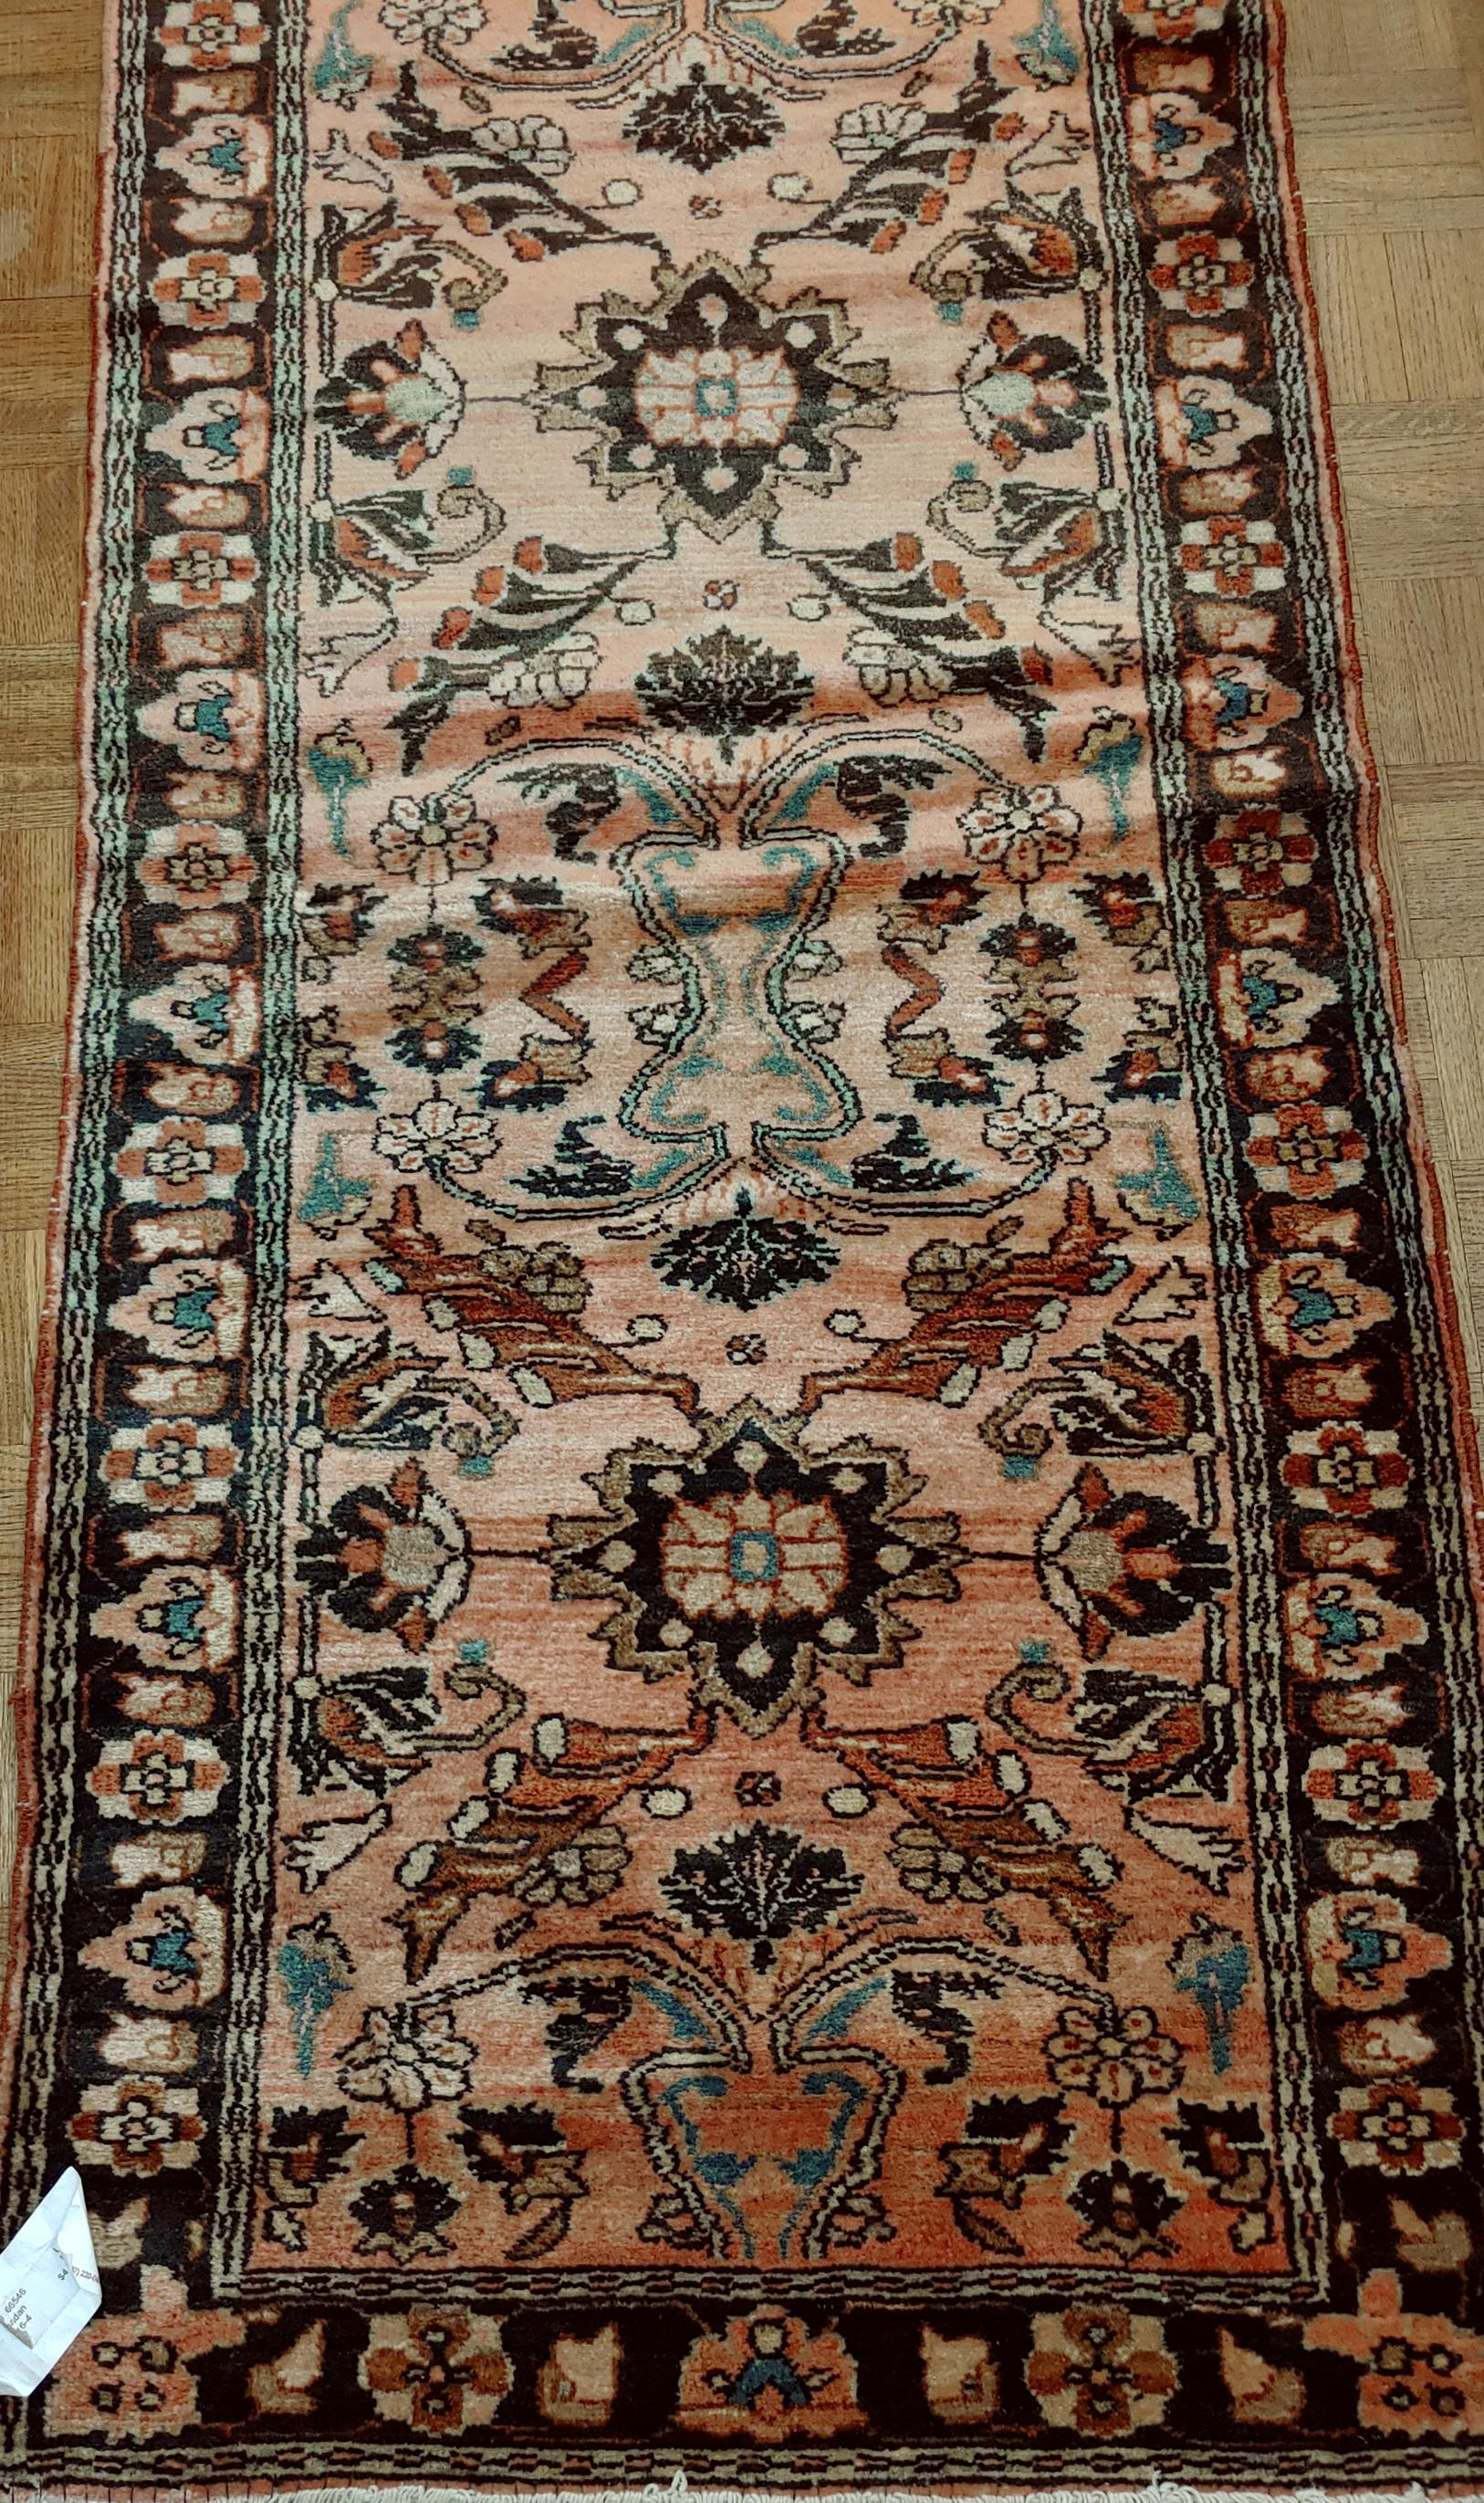 Woven Antique Persian Lilyhan Rug, Rust/Mauve Colored Field, 1915 runner 2-5x16=4 For Sale